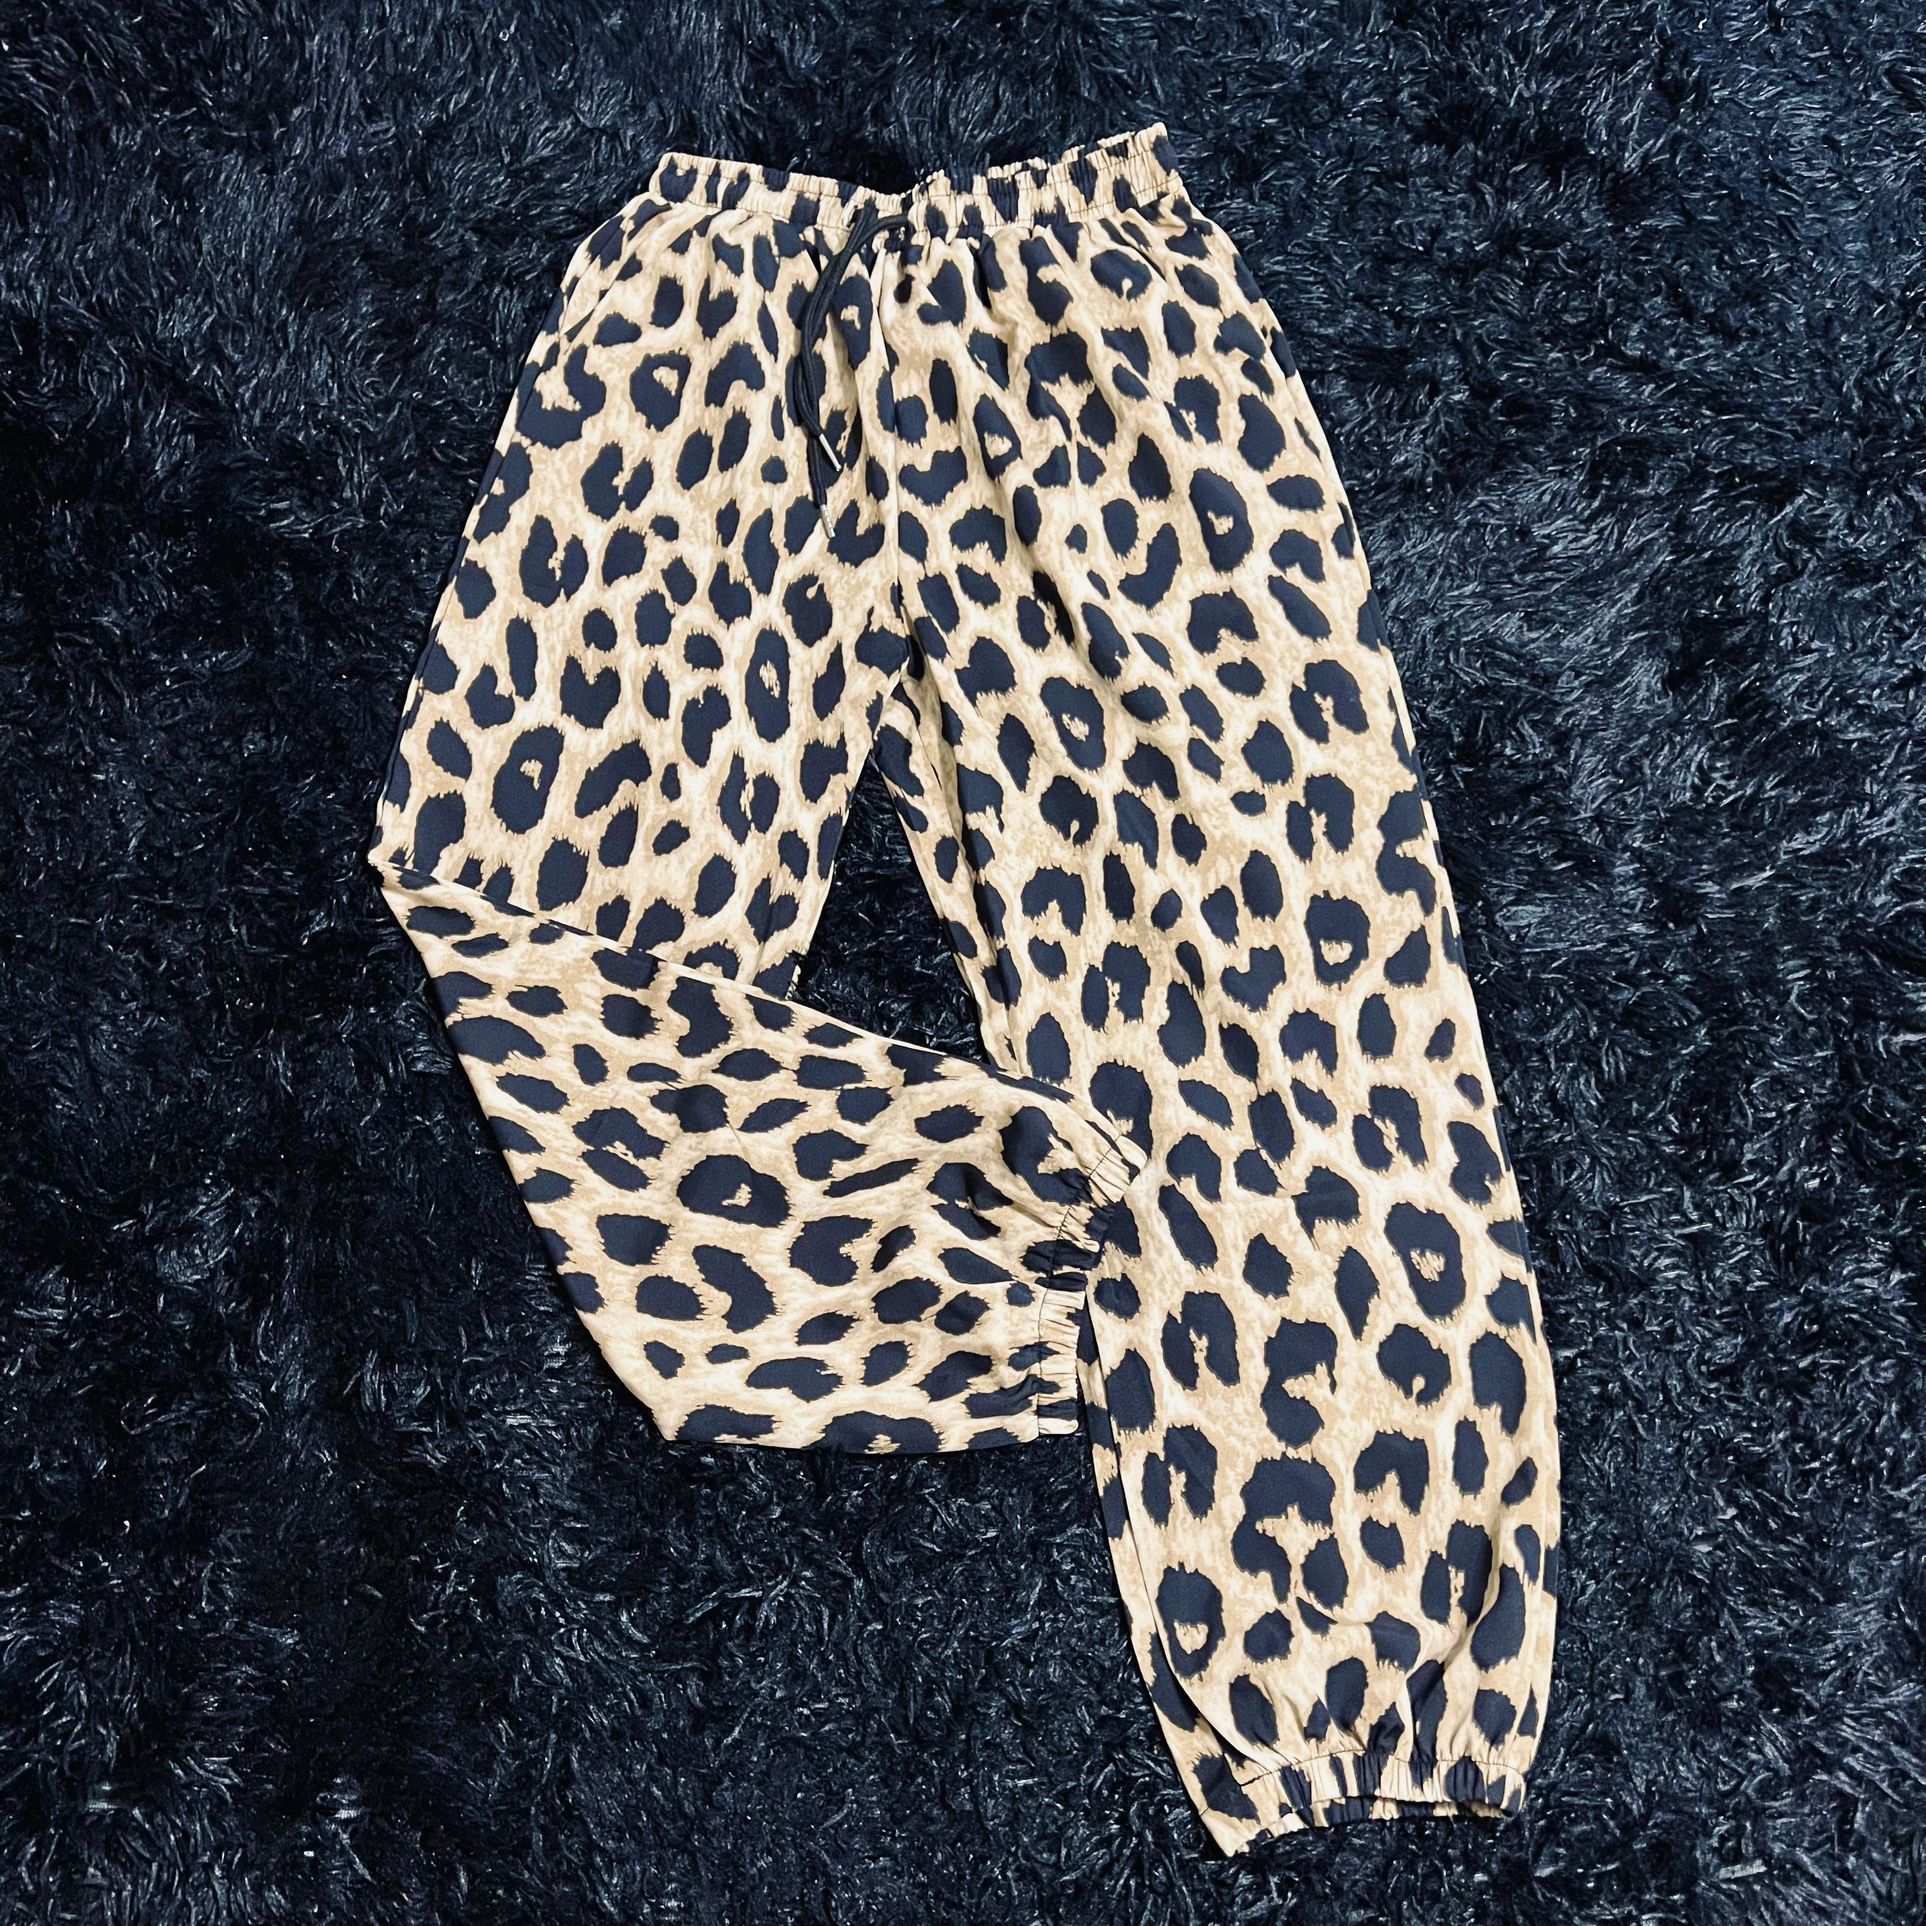 Leopard Print Elastic Pants Drawstring High Waist Pants Casual Every Day Pants cargo trousers joggers animal print 